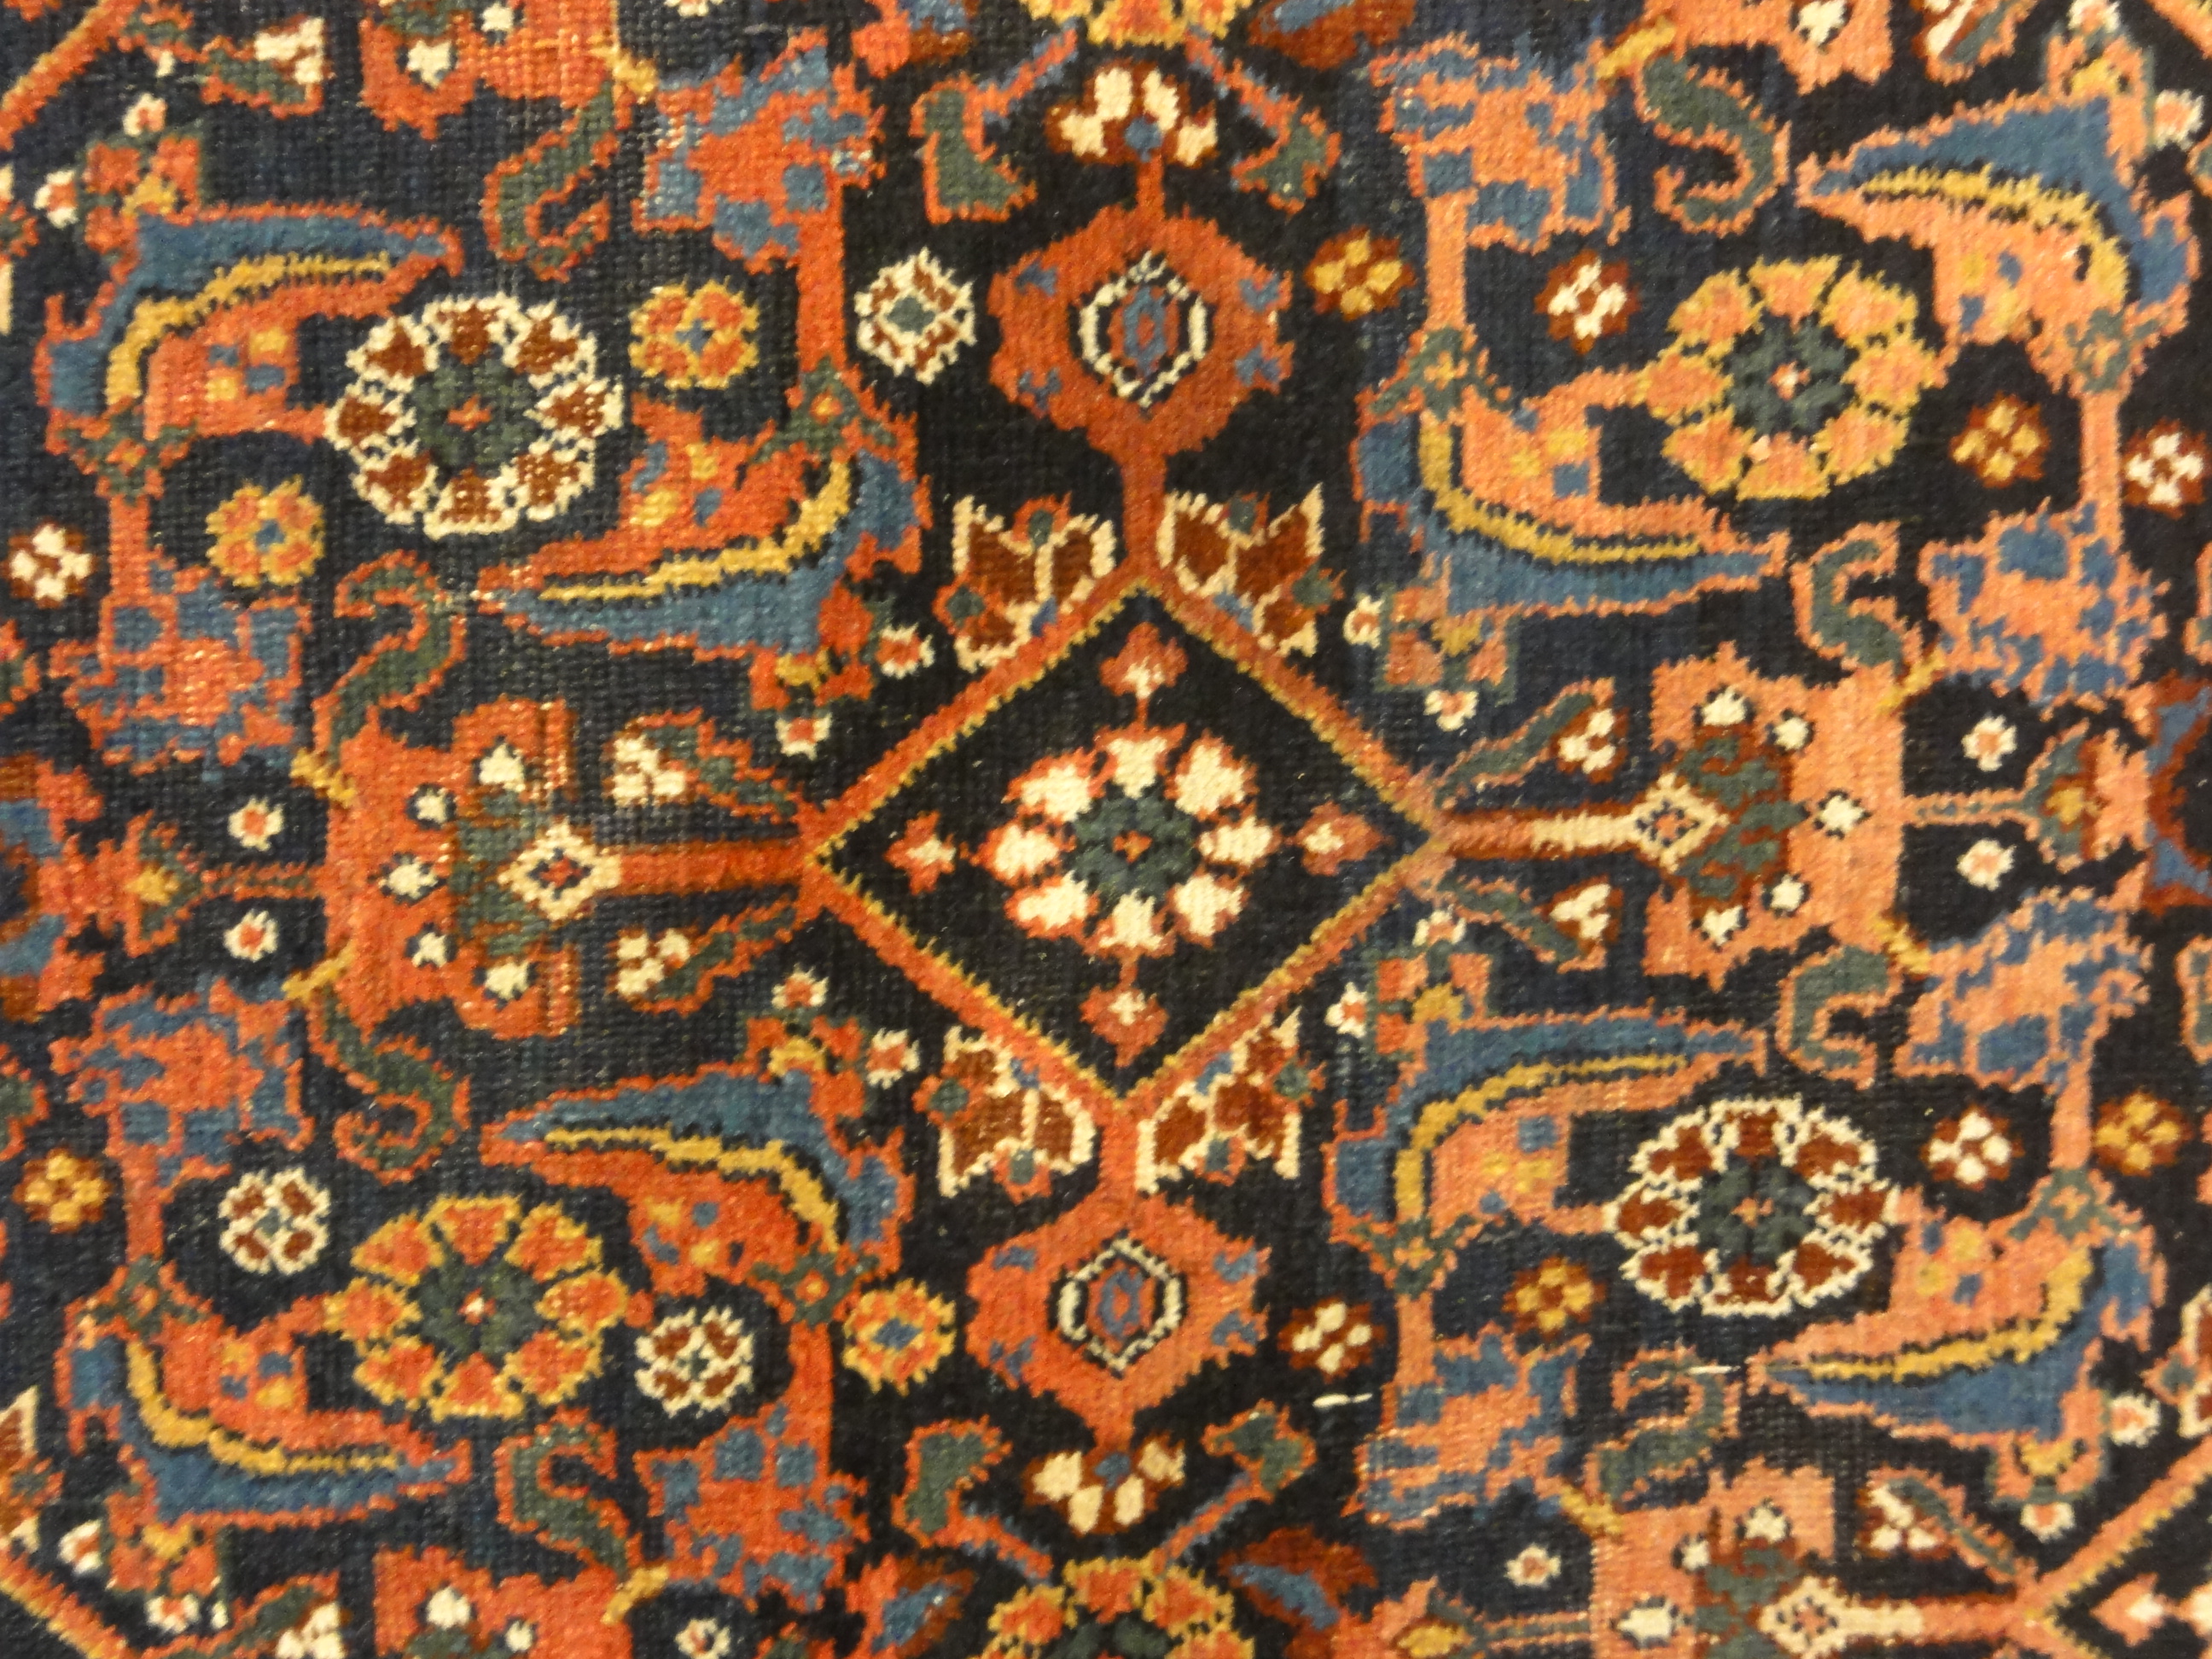 Antique Persian Afshar Herati Rug Genuine Authentic Intricate Woven Carpet Art Santa Barbara Design Center and Rugs and More